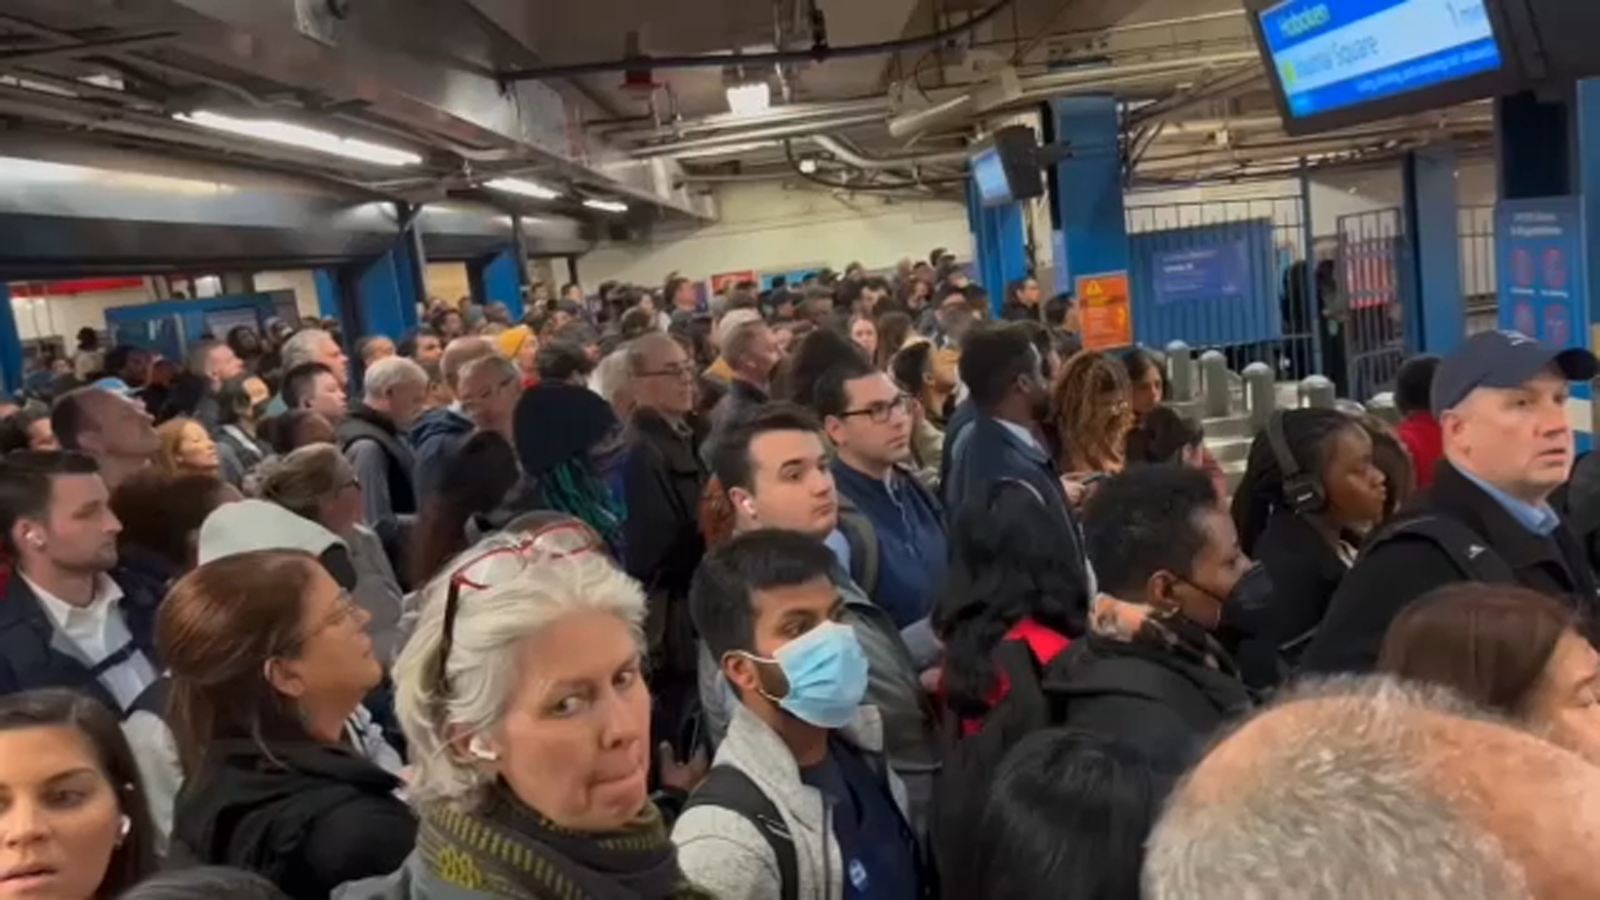 Rail service in and out of Penn Station resumes with delays due to police activity